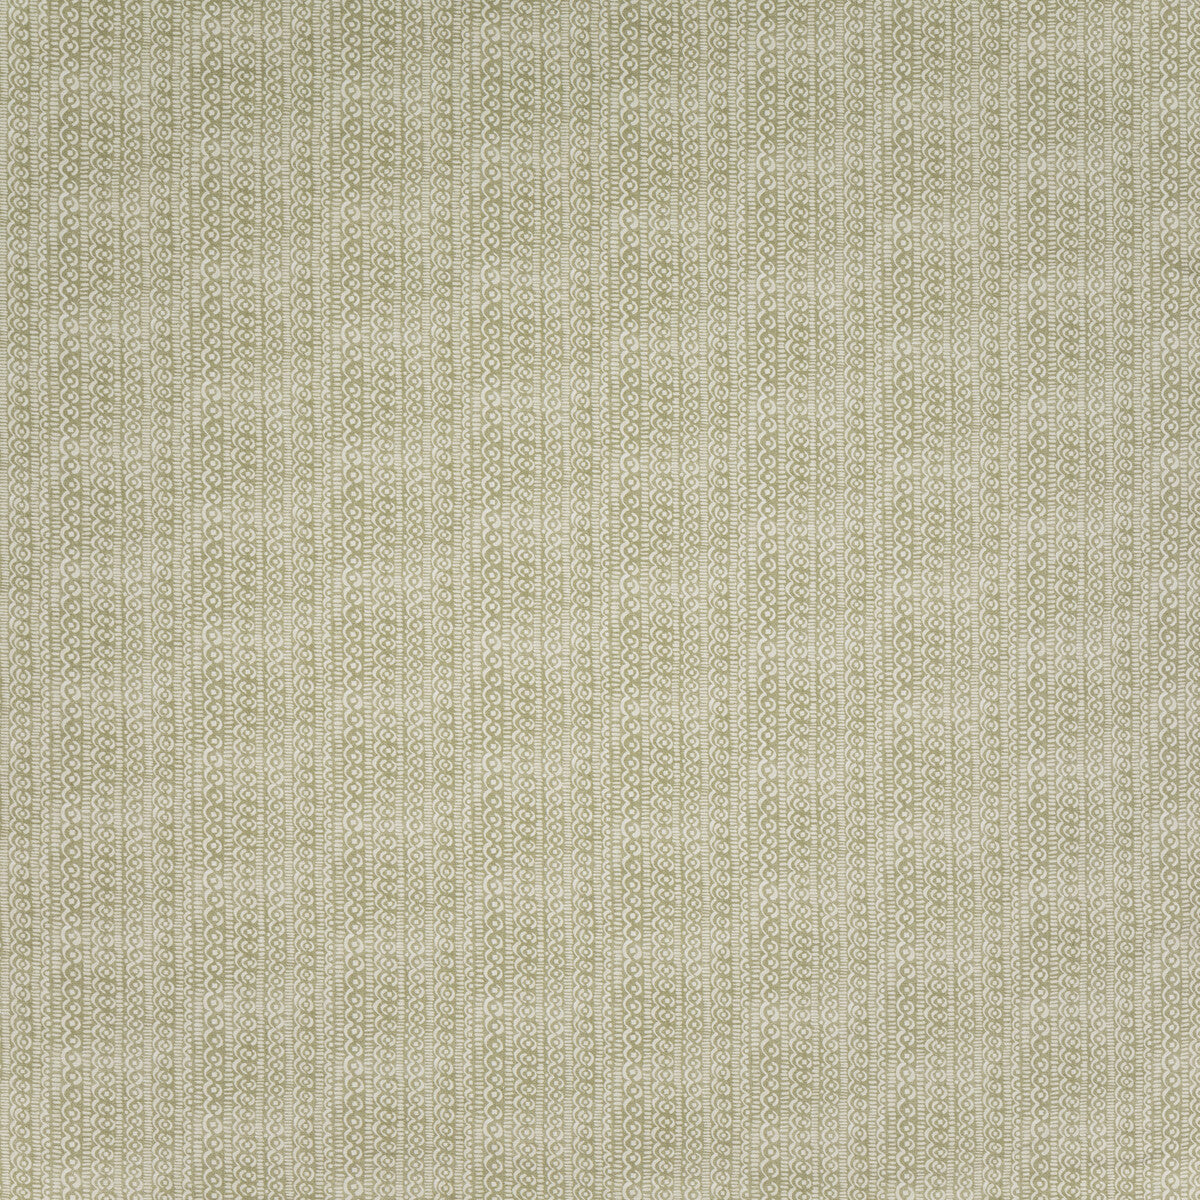 Portland fabric in olive color - pattern BFC-3707.130.0 - by Lee Jofa in the Blithfield Eden collection